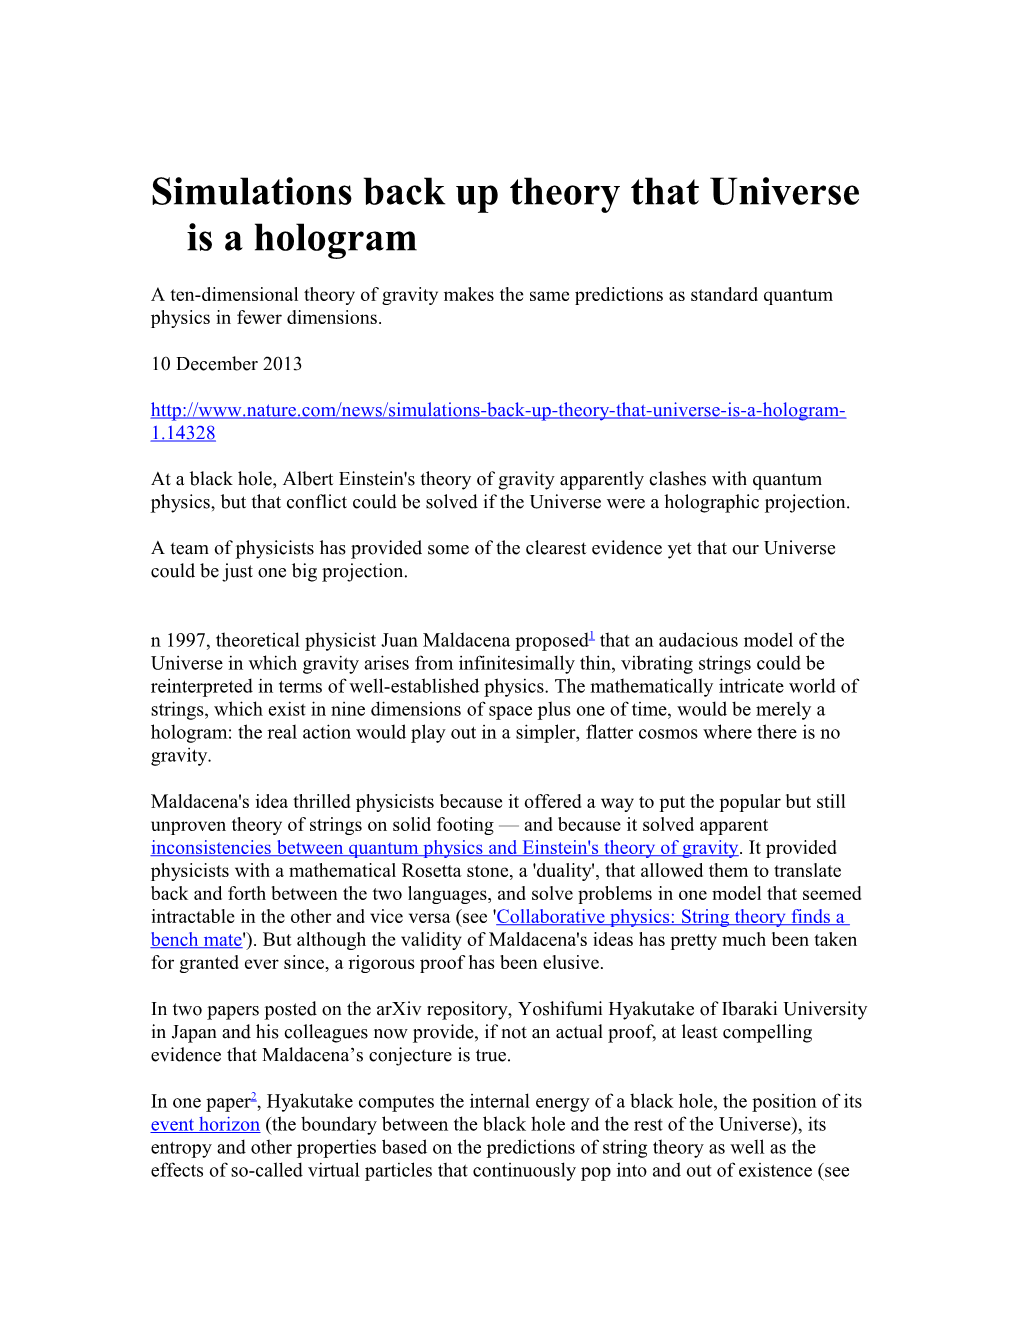 Simulations Back up Theory That Universe Is a Hologram